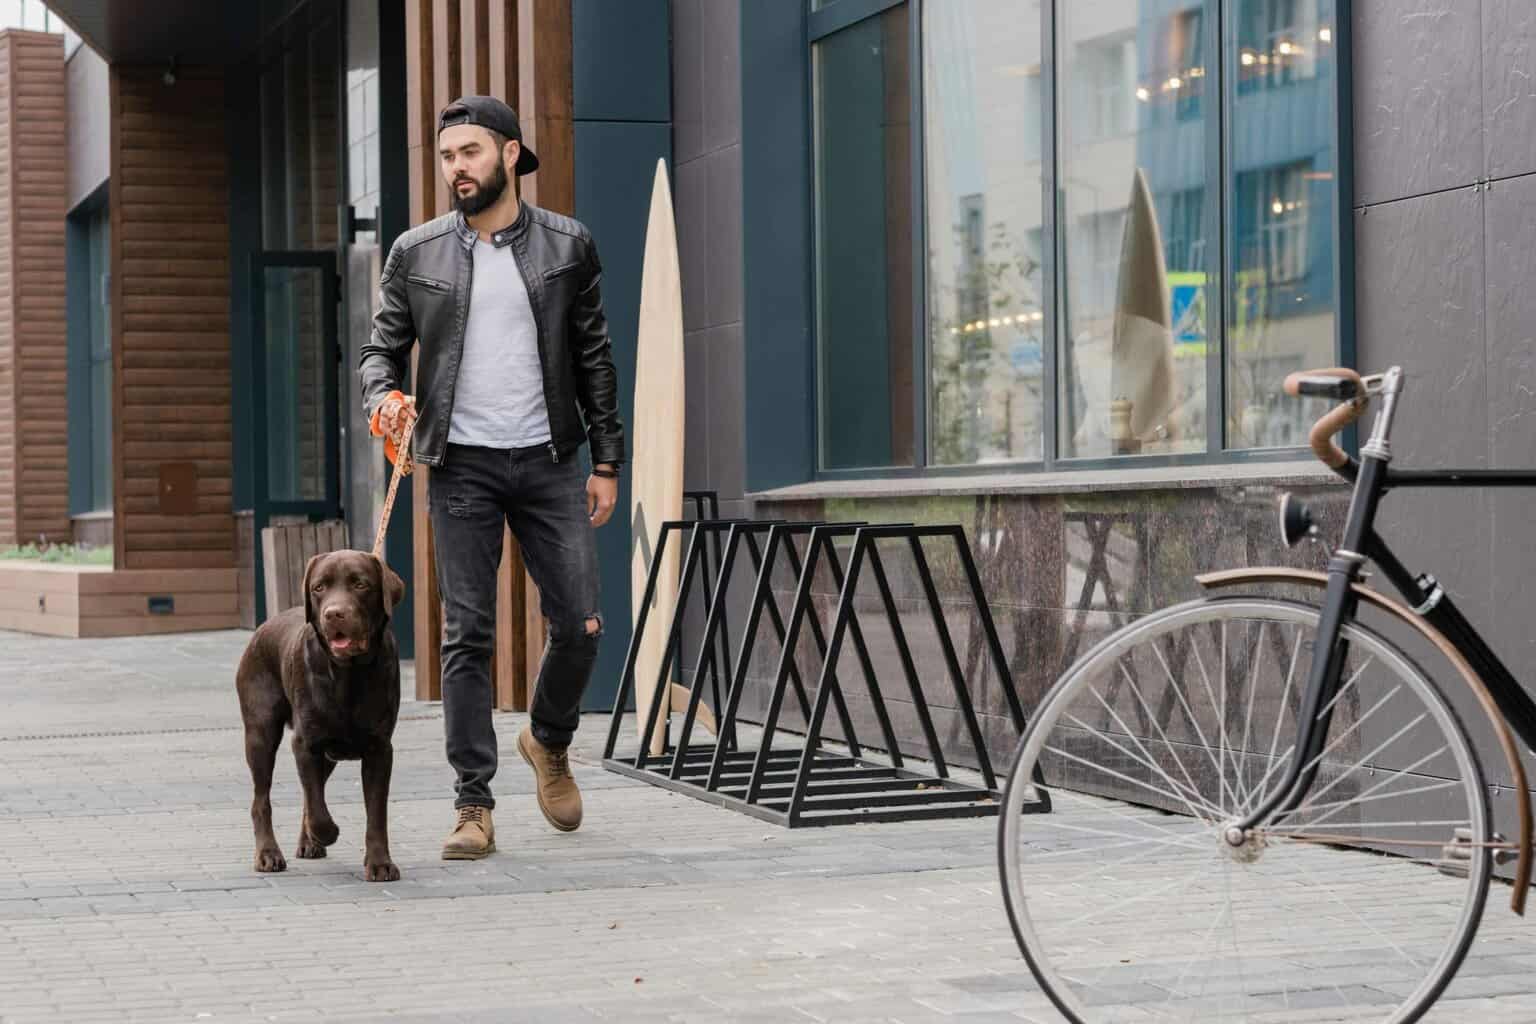 Man walks chocolate Labrador on a city sidewalk. If you walk your dog in your neighborhood, mix up the route and don't take the same one every day.